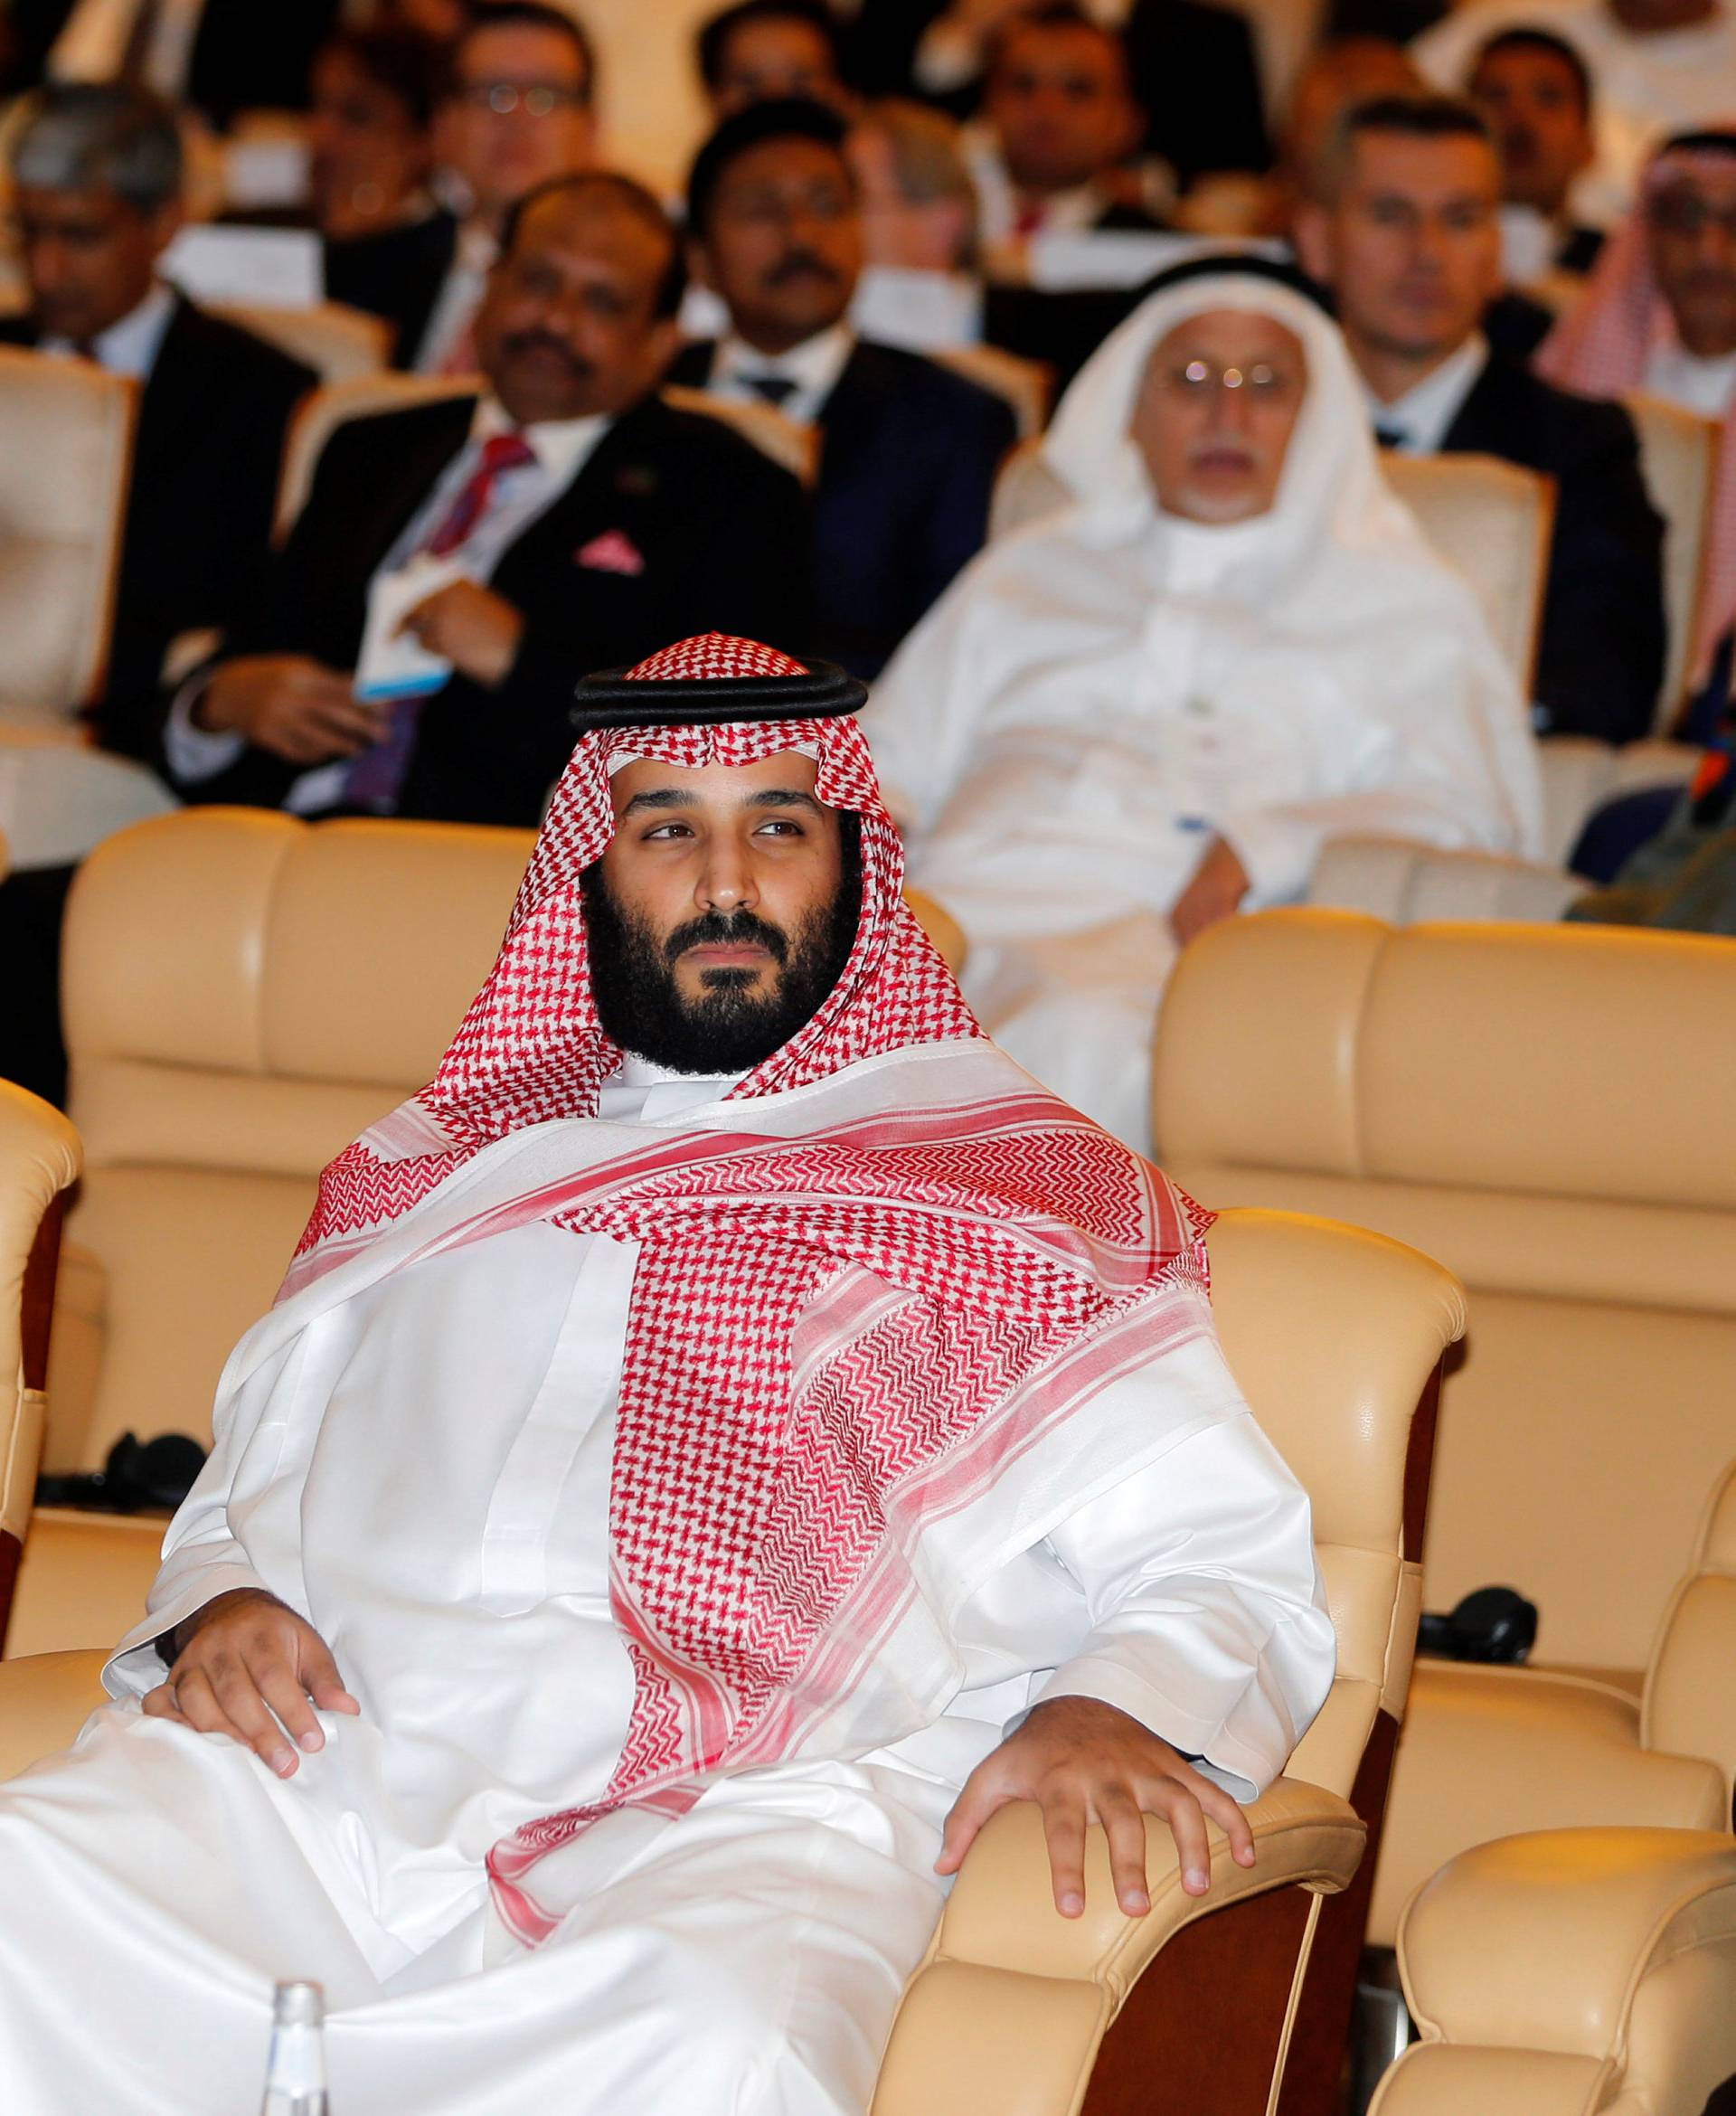 Saudi Crown Prince Mohammed bin Salman and Christine Lagarde, International Monetary Fund (IMF) Managing Director, attend the Future Investment Initiative conference in Riyadh